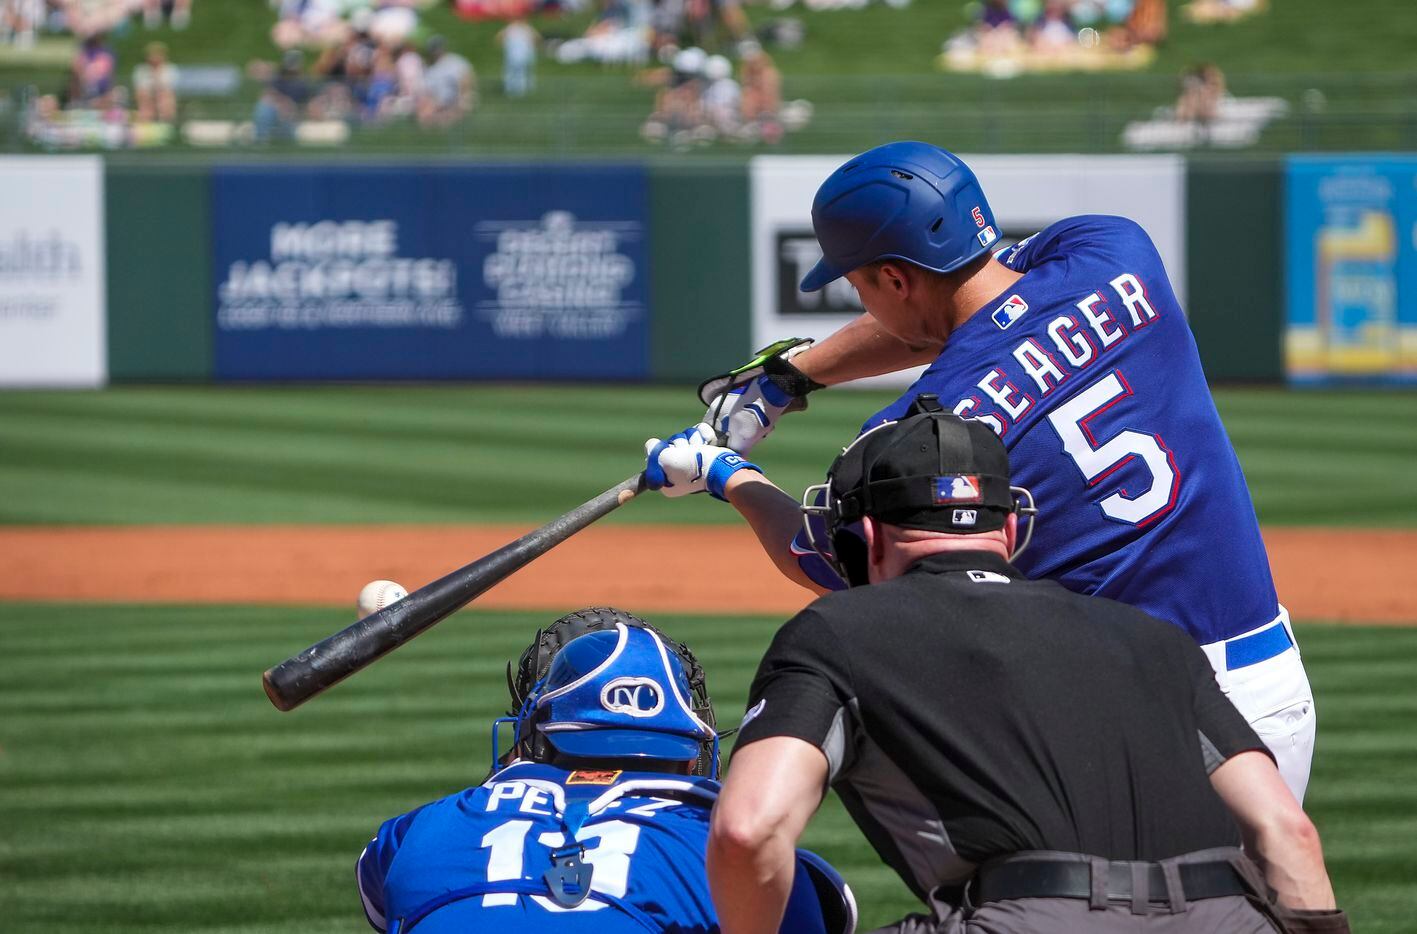 Texas Rangers infielder Corey Seager connects on a single in his first spring training game...